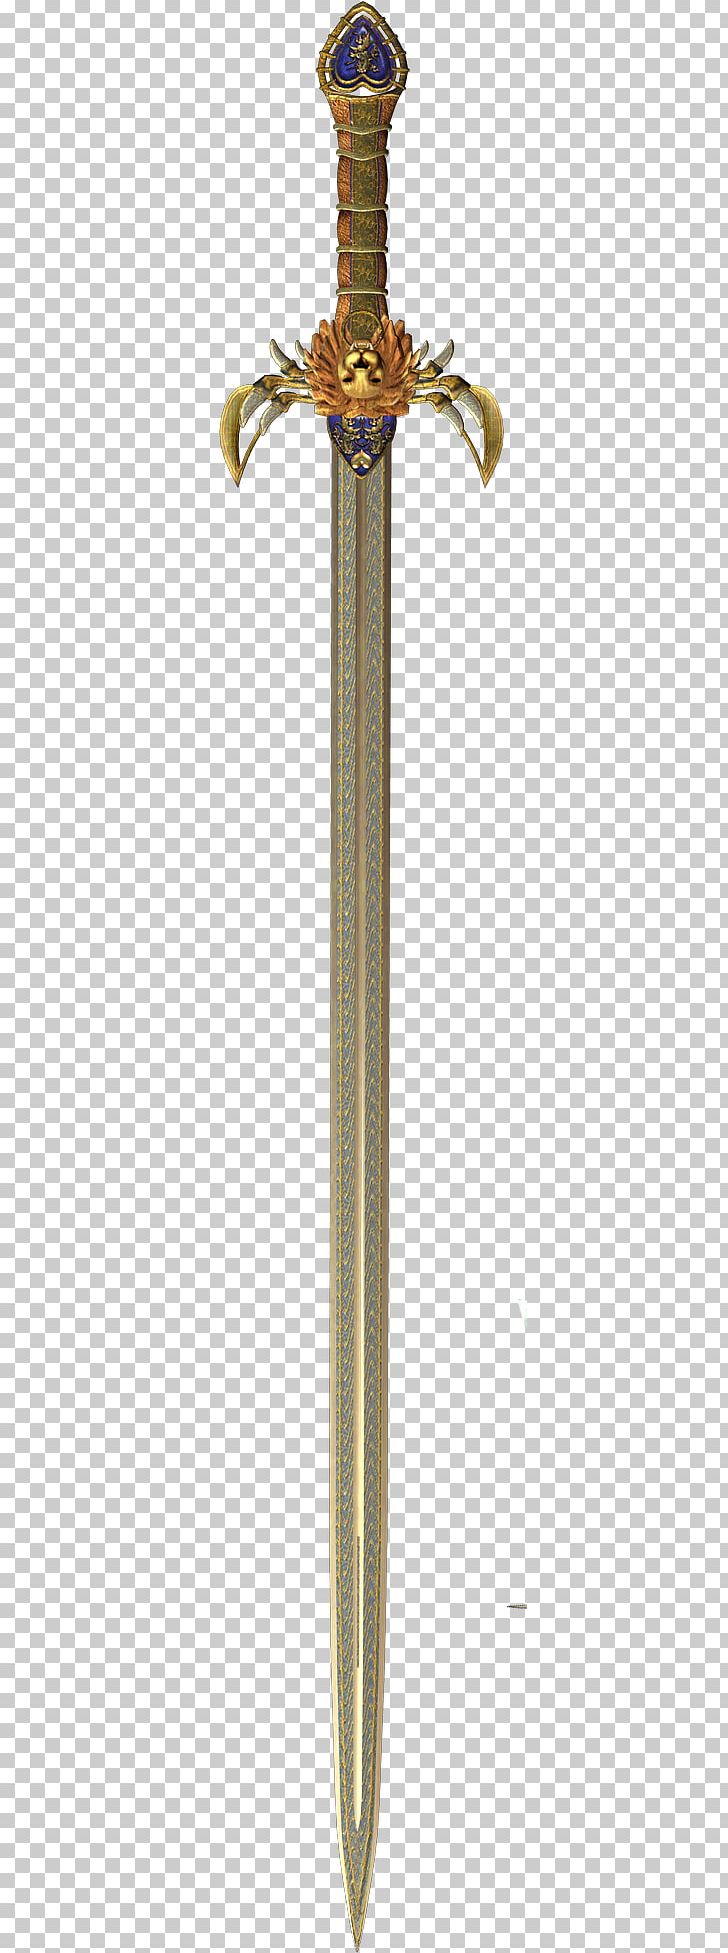 Sabre Sword Weapon Dagger PNG, Clipart, Brass, Christmas Decoration, Cold Weapon, Dagger, Decor Free PNG Download